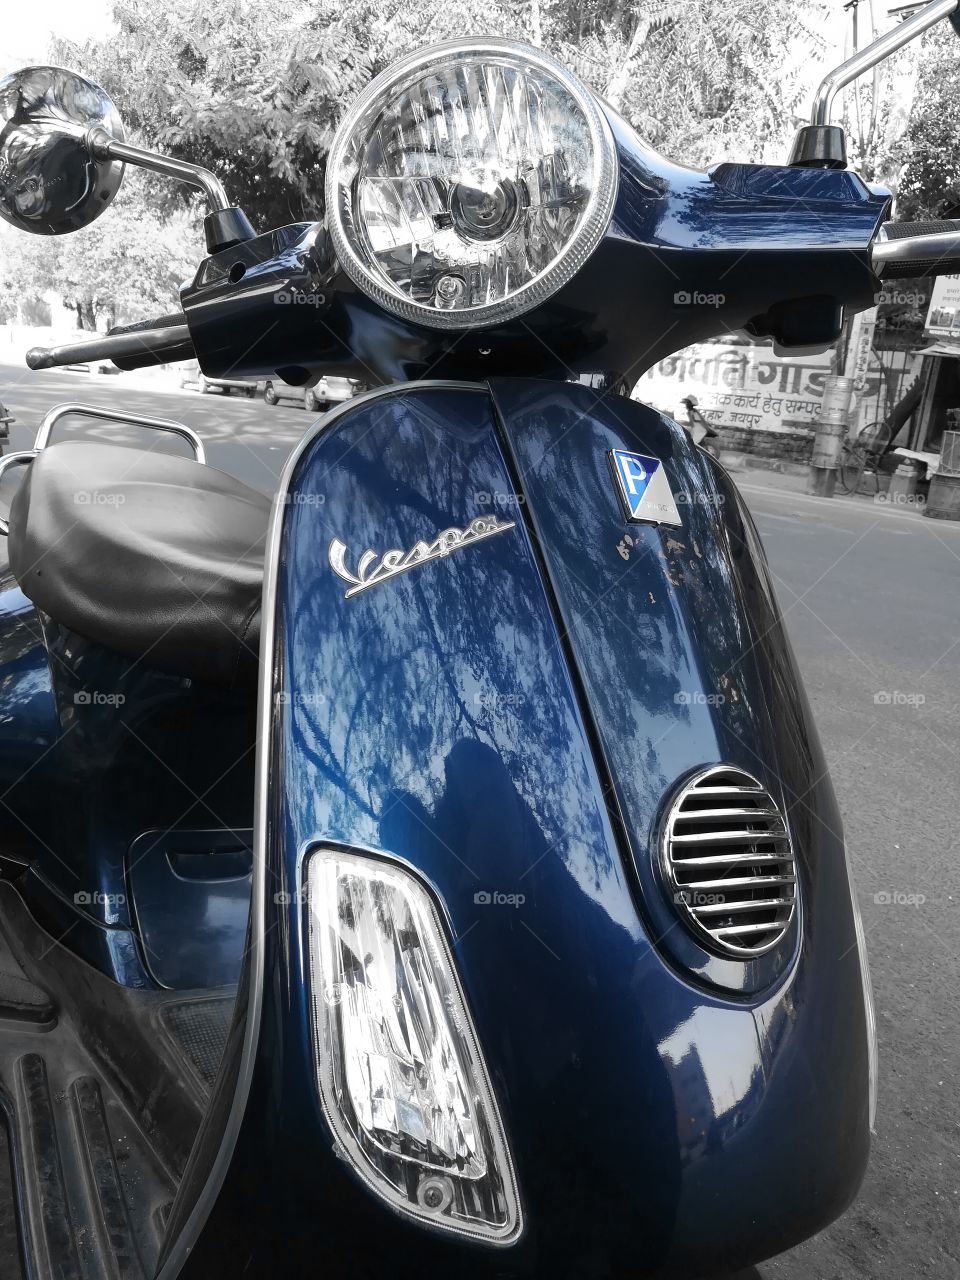 MOBILE PHOTOGRAPHY, Vespa Scooter, Street Photography, Clicked By Honor 6x Pro mode, Colour Splash, On Road Side, Chrome Finish.